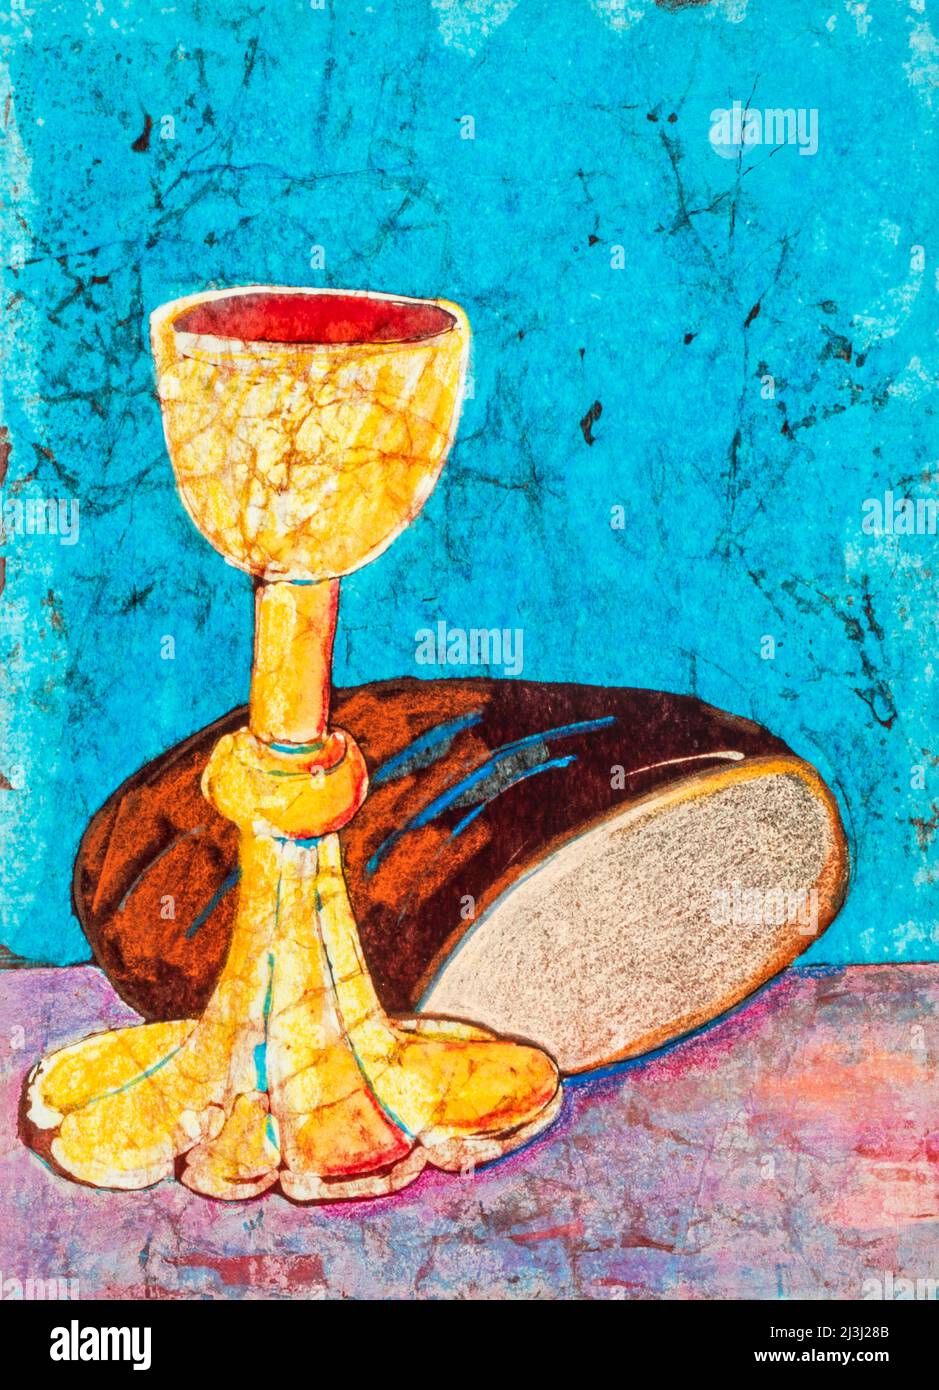 Batika watercolor on Japanese paper by Regine Martin Wine and bread, symbolic image for the Lord's Supper, Eucharist celebration, holy sacrament, Stock Photo